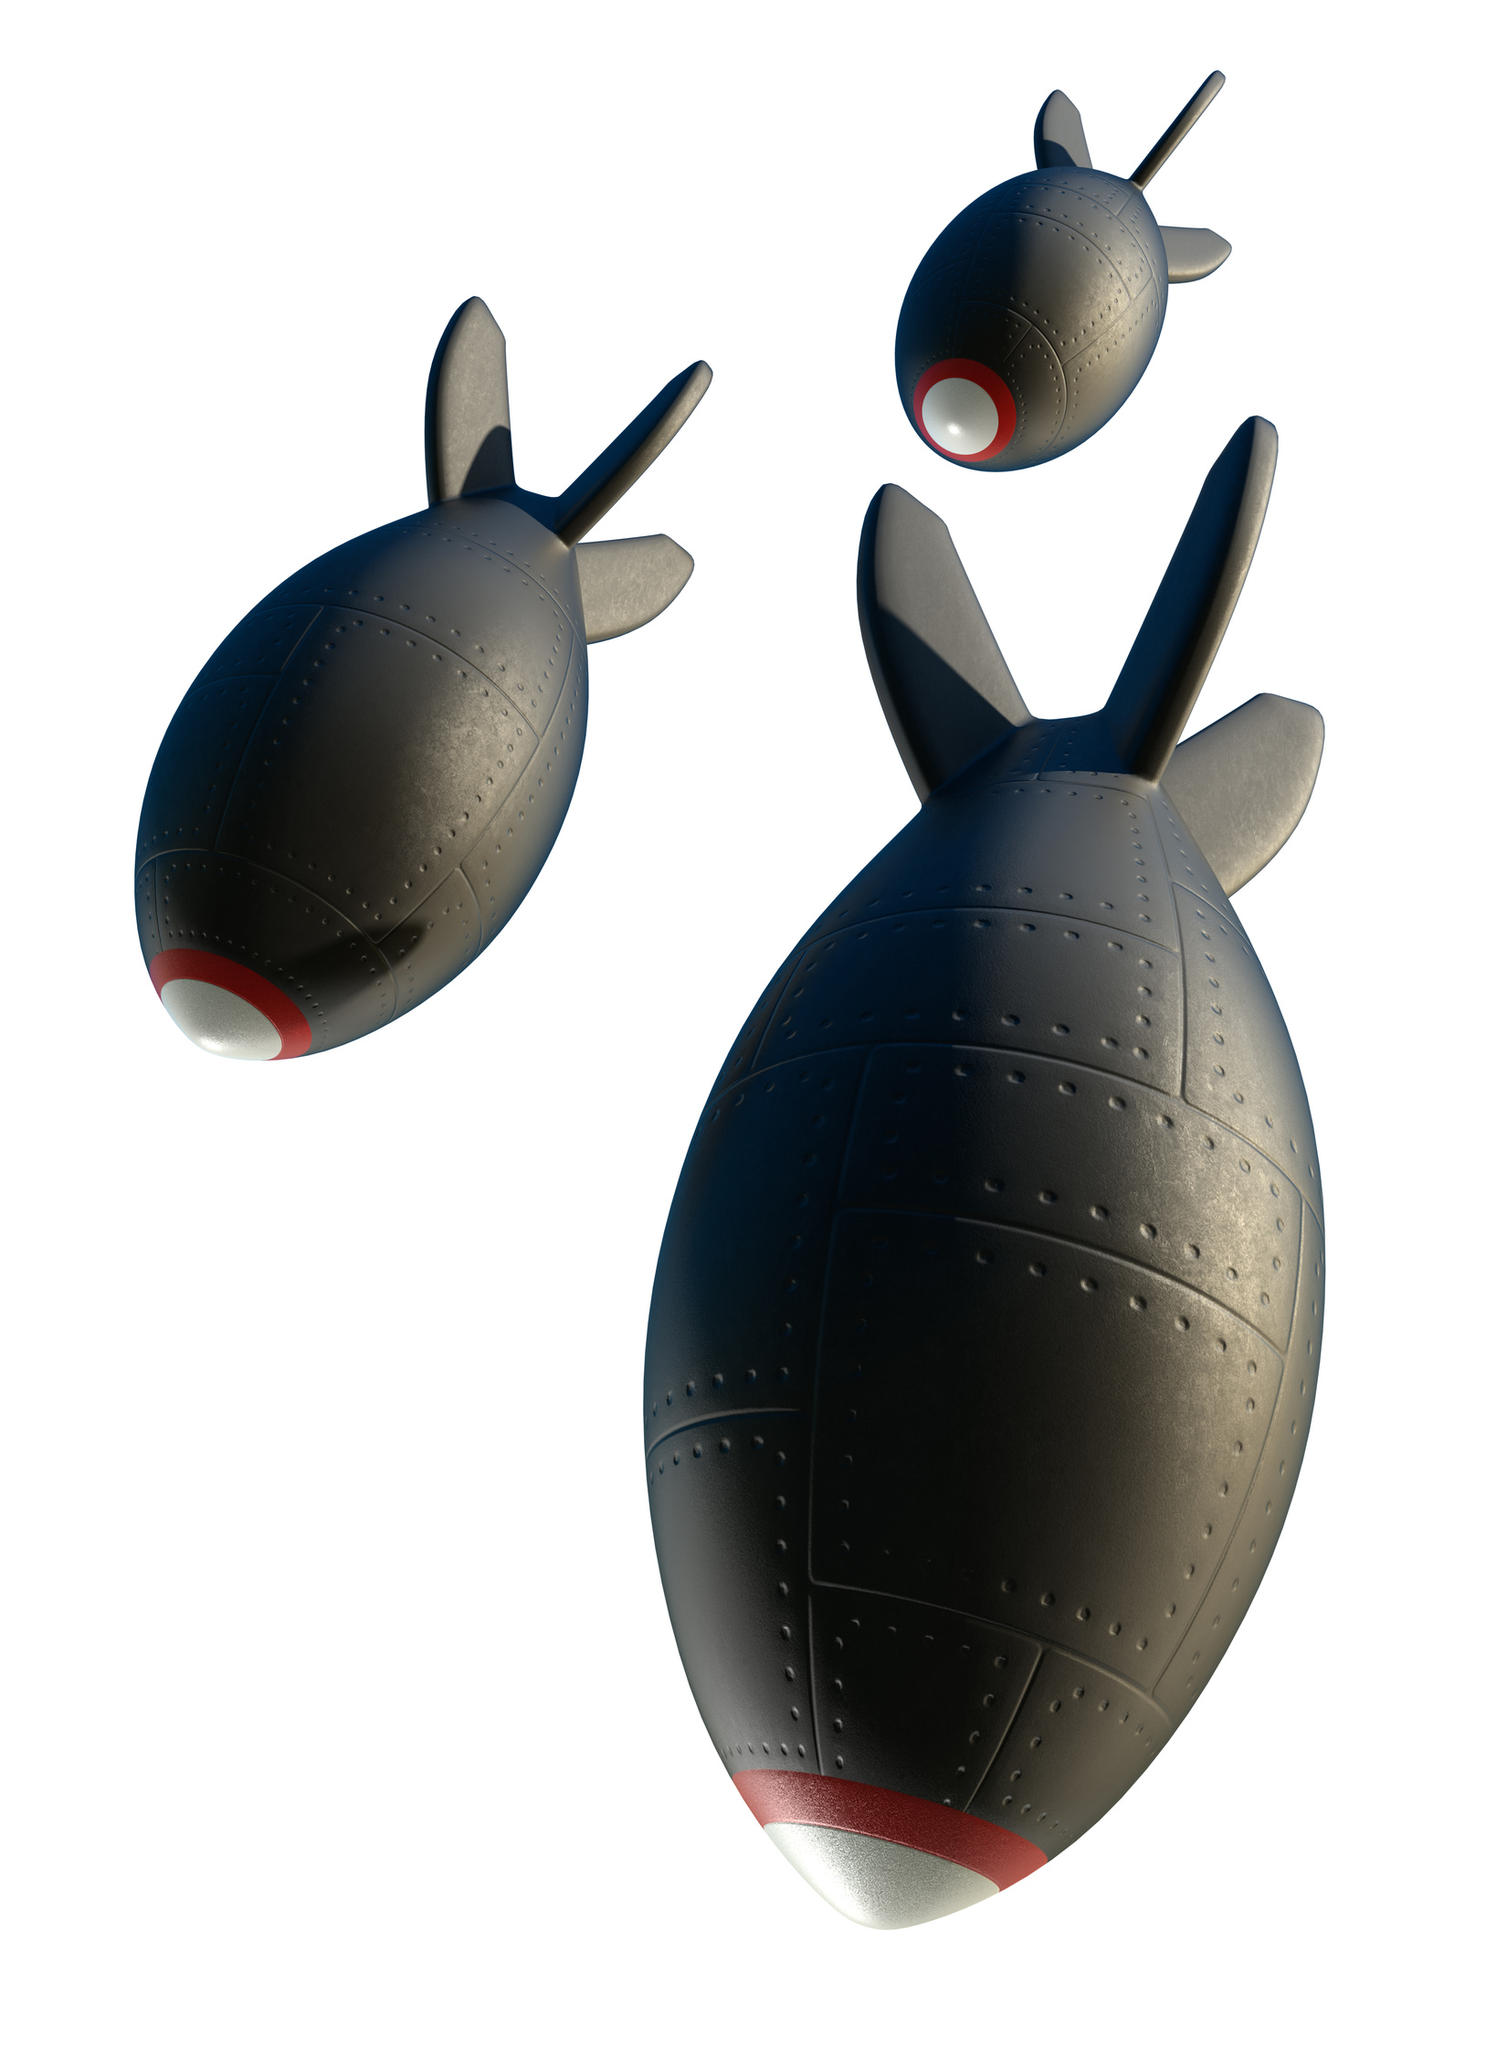 Bombs Falling Over A White Background  Clipping Path Included